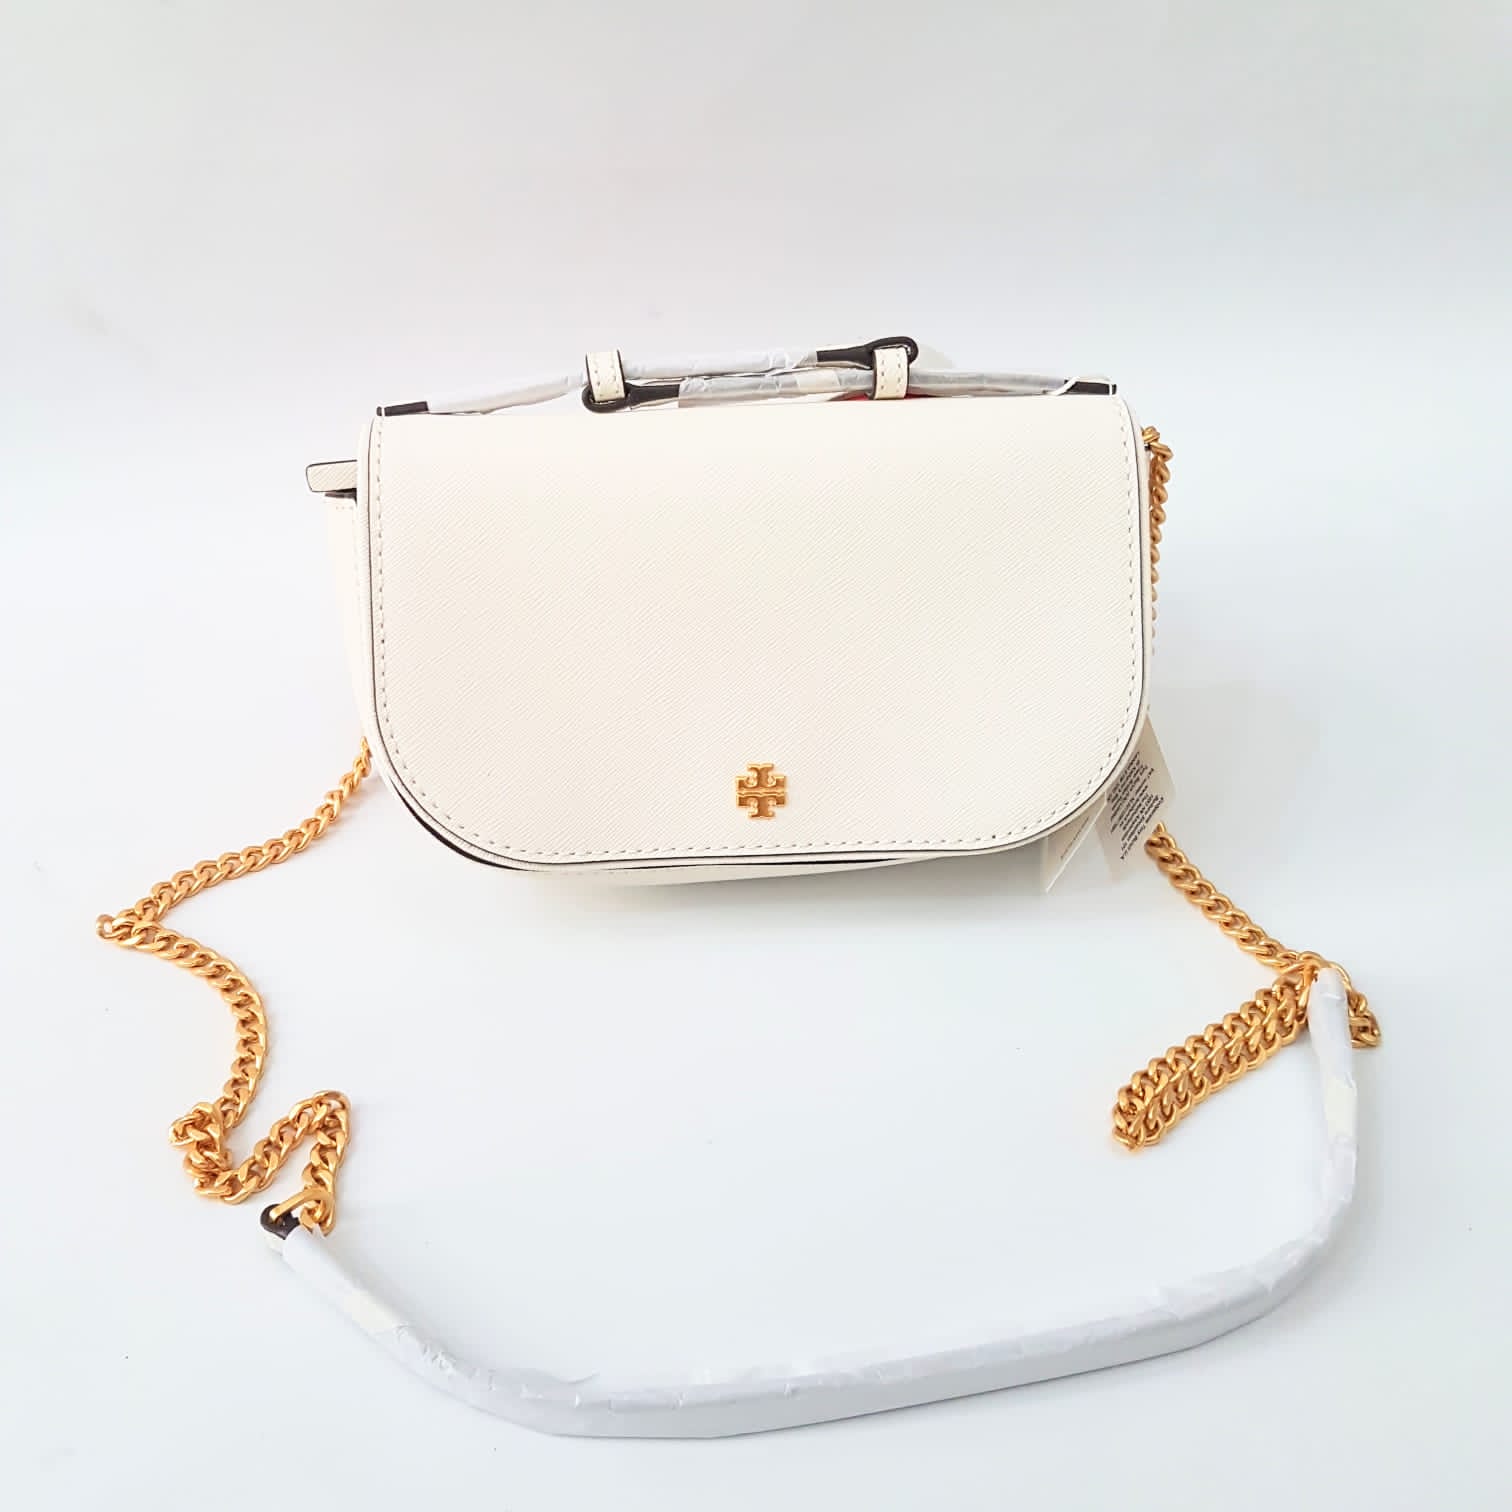 Tory Burch Emerson Top Handle Crossbody Tory Burch Outlet Quick